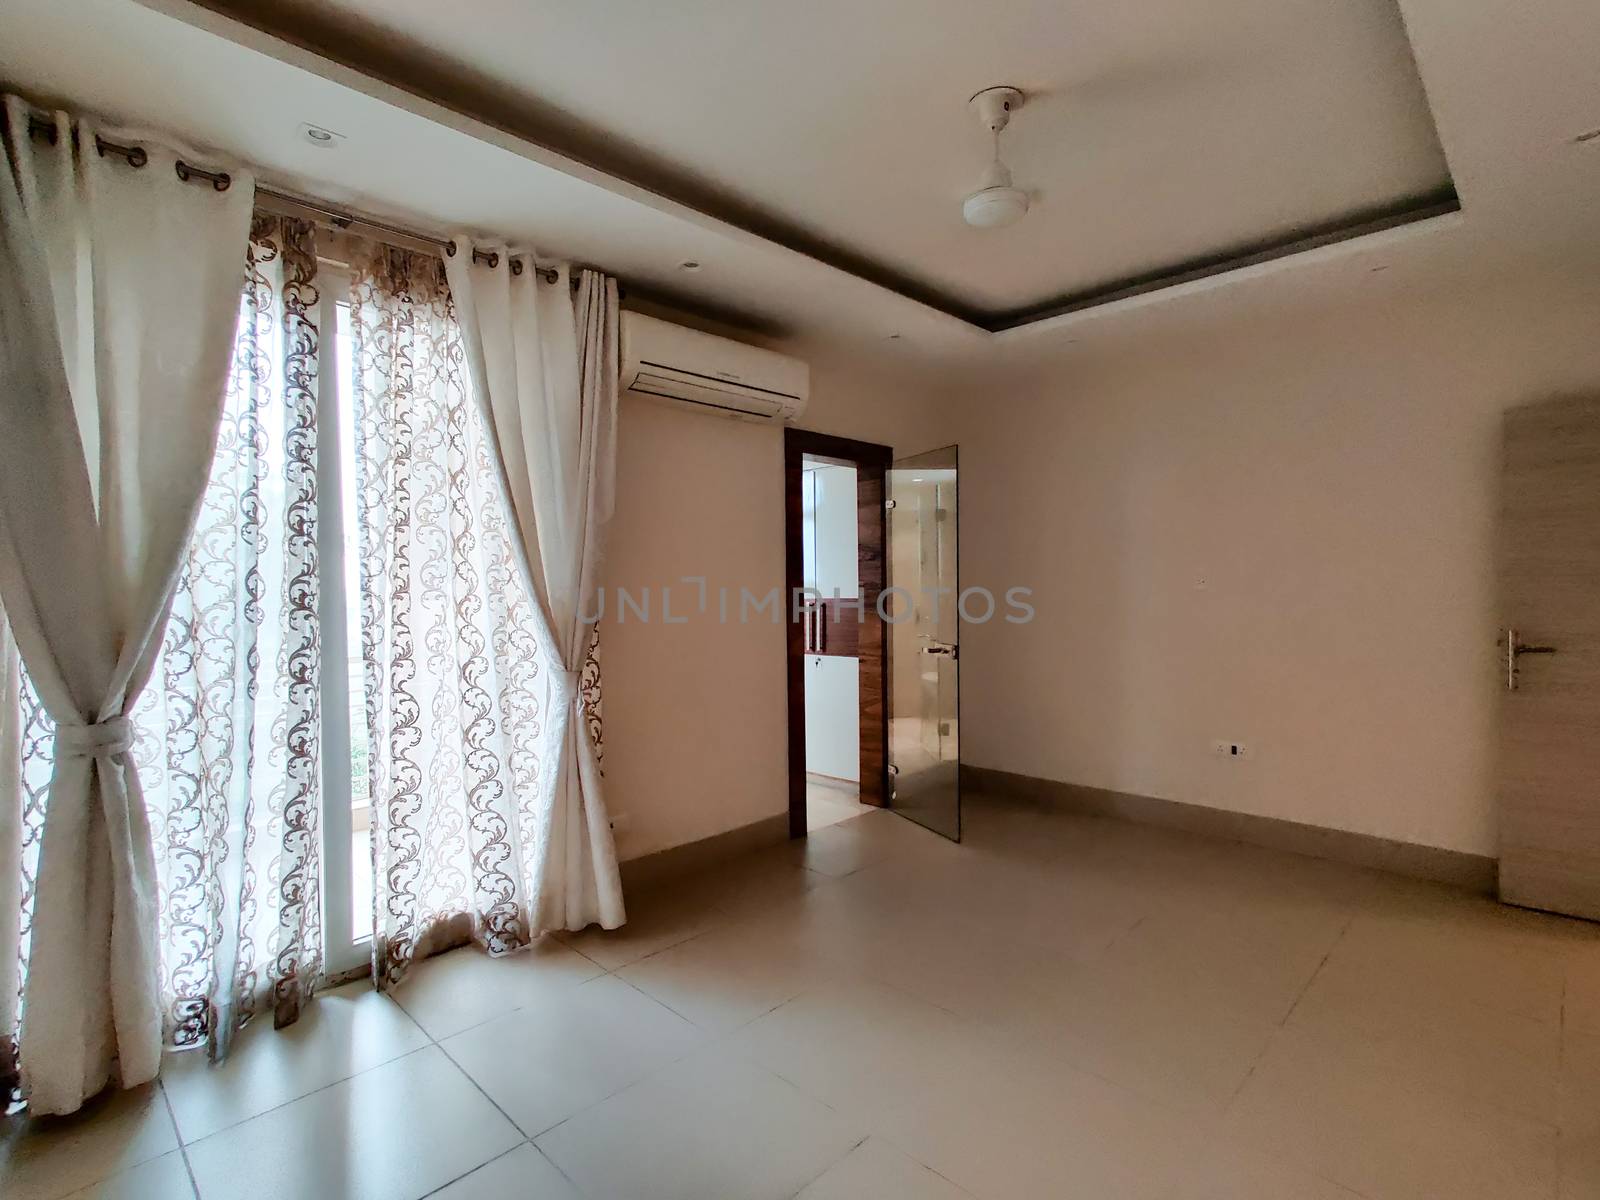 Wide angle shot of a ready to move in apartment with lace curtains and good natural light by Shalinimathur